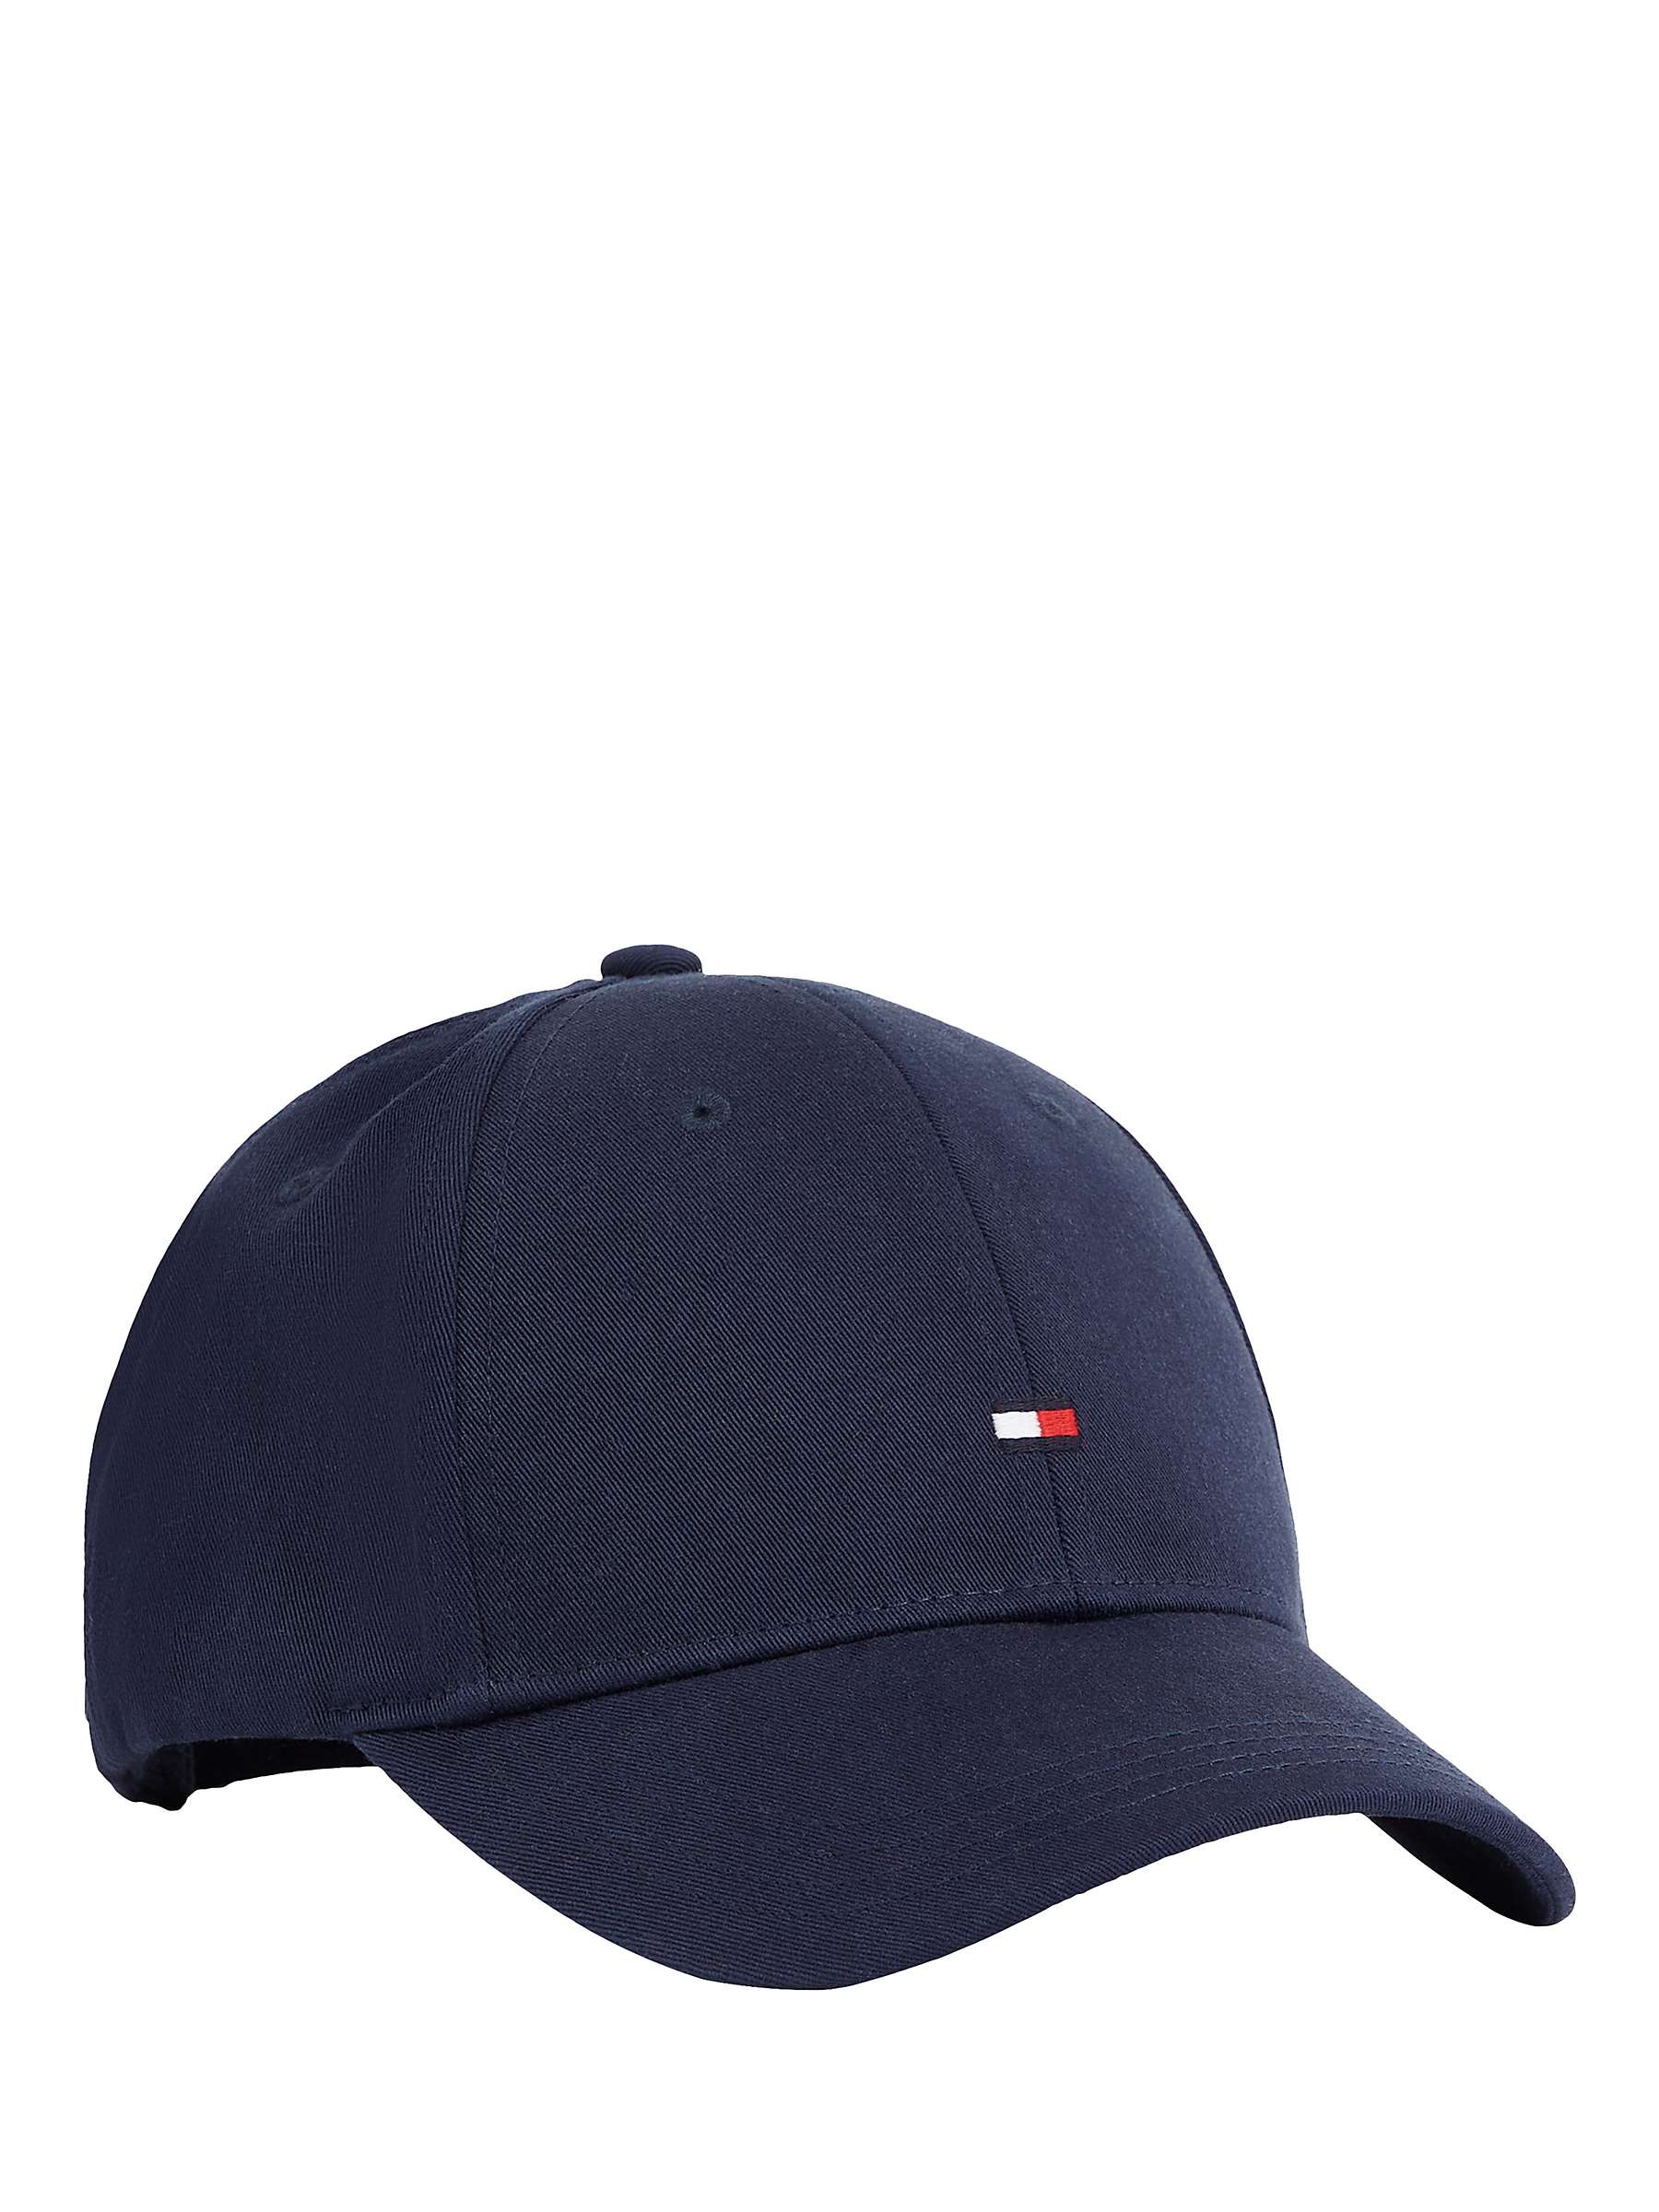 Buy Tommy Hilfiger Kids' Small Flag Logo Organic Cotton Cap, Space Blue Online at johnlewis.com